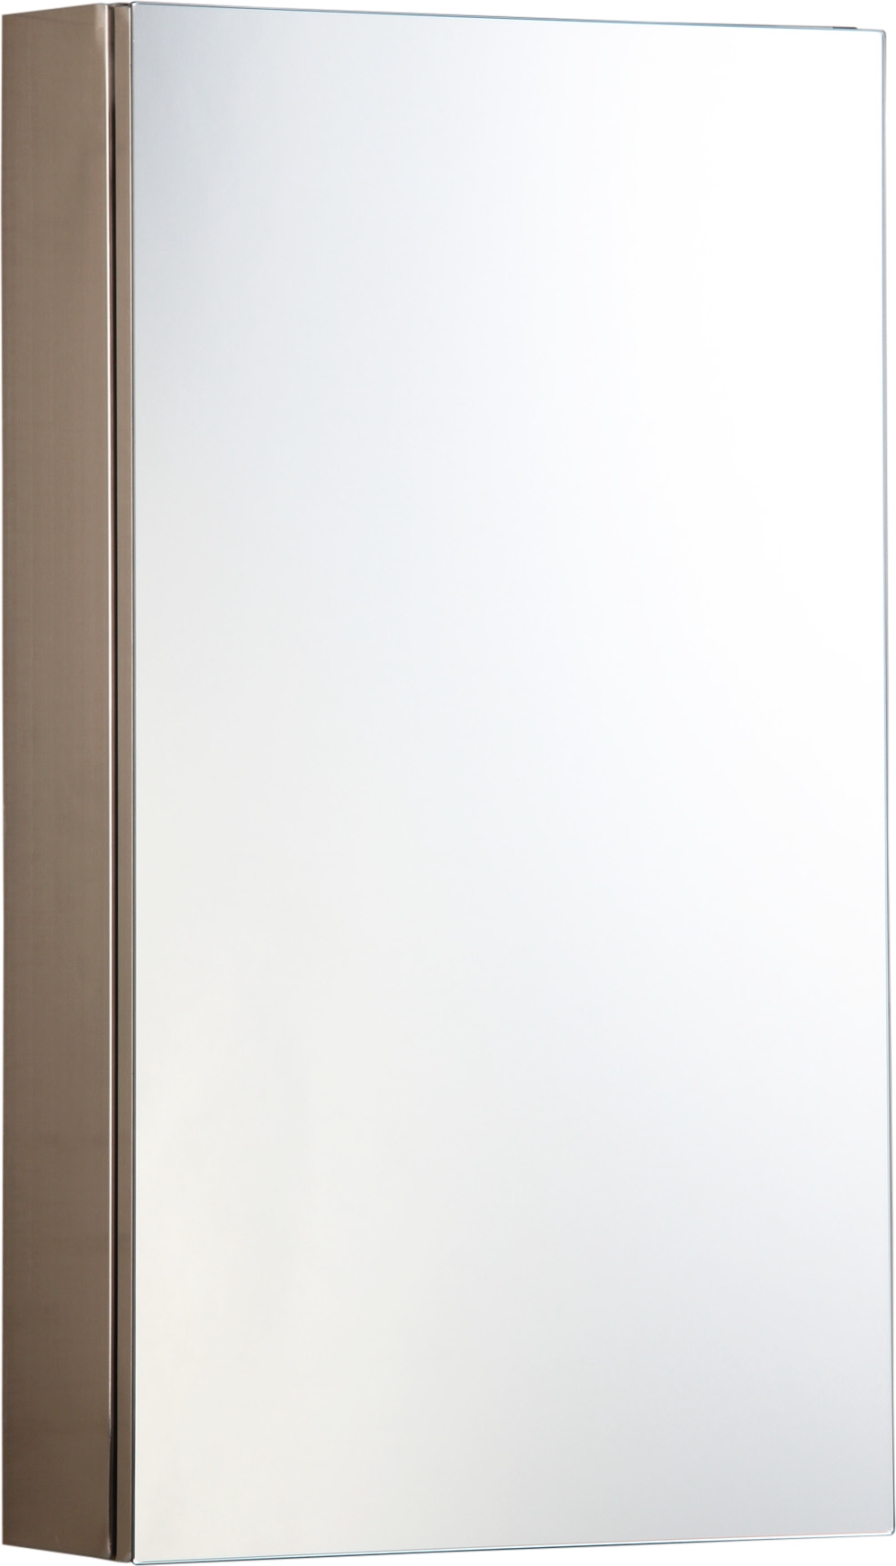 CB-A3060 304G Stainless steel bathroom mirror  cabinet